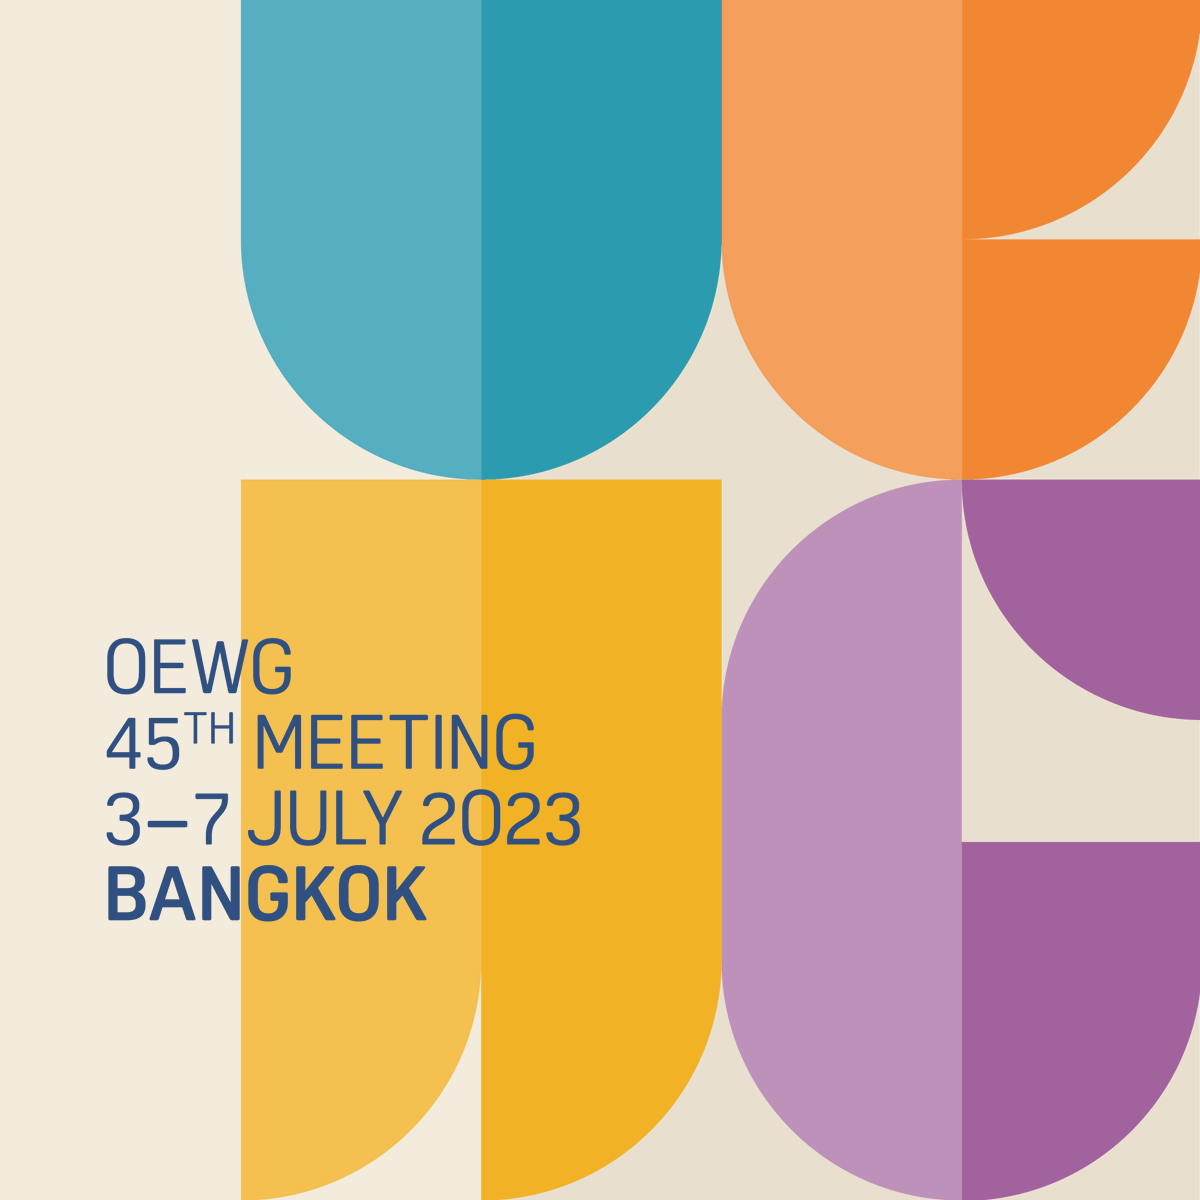 Delegates are starting to arrive for preliminary meetings and the workshop on Strengthening the Montreal Protocol in the run up to the #OEWG45 @UNESCAP